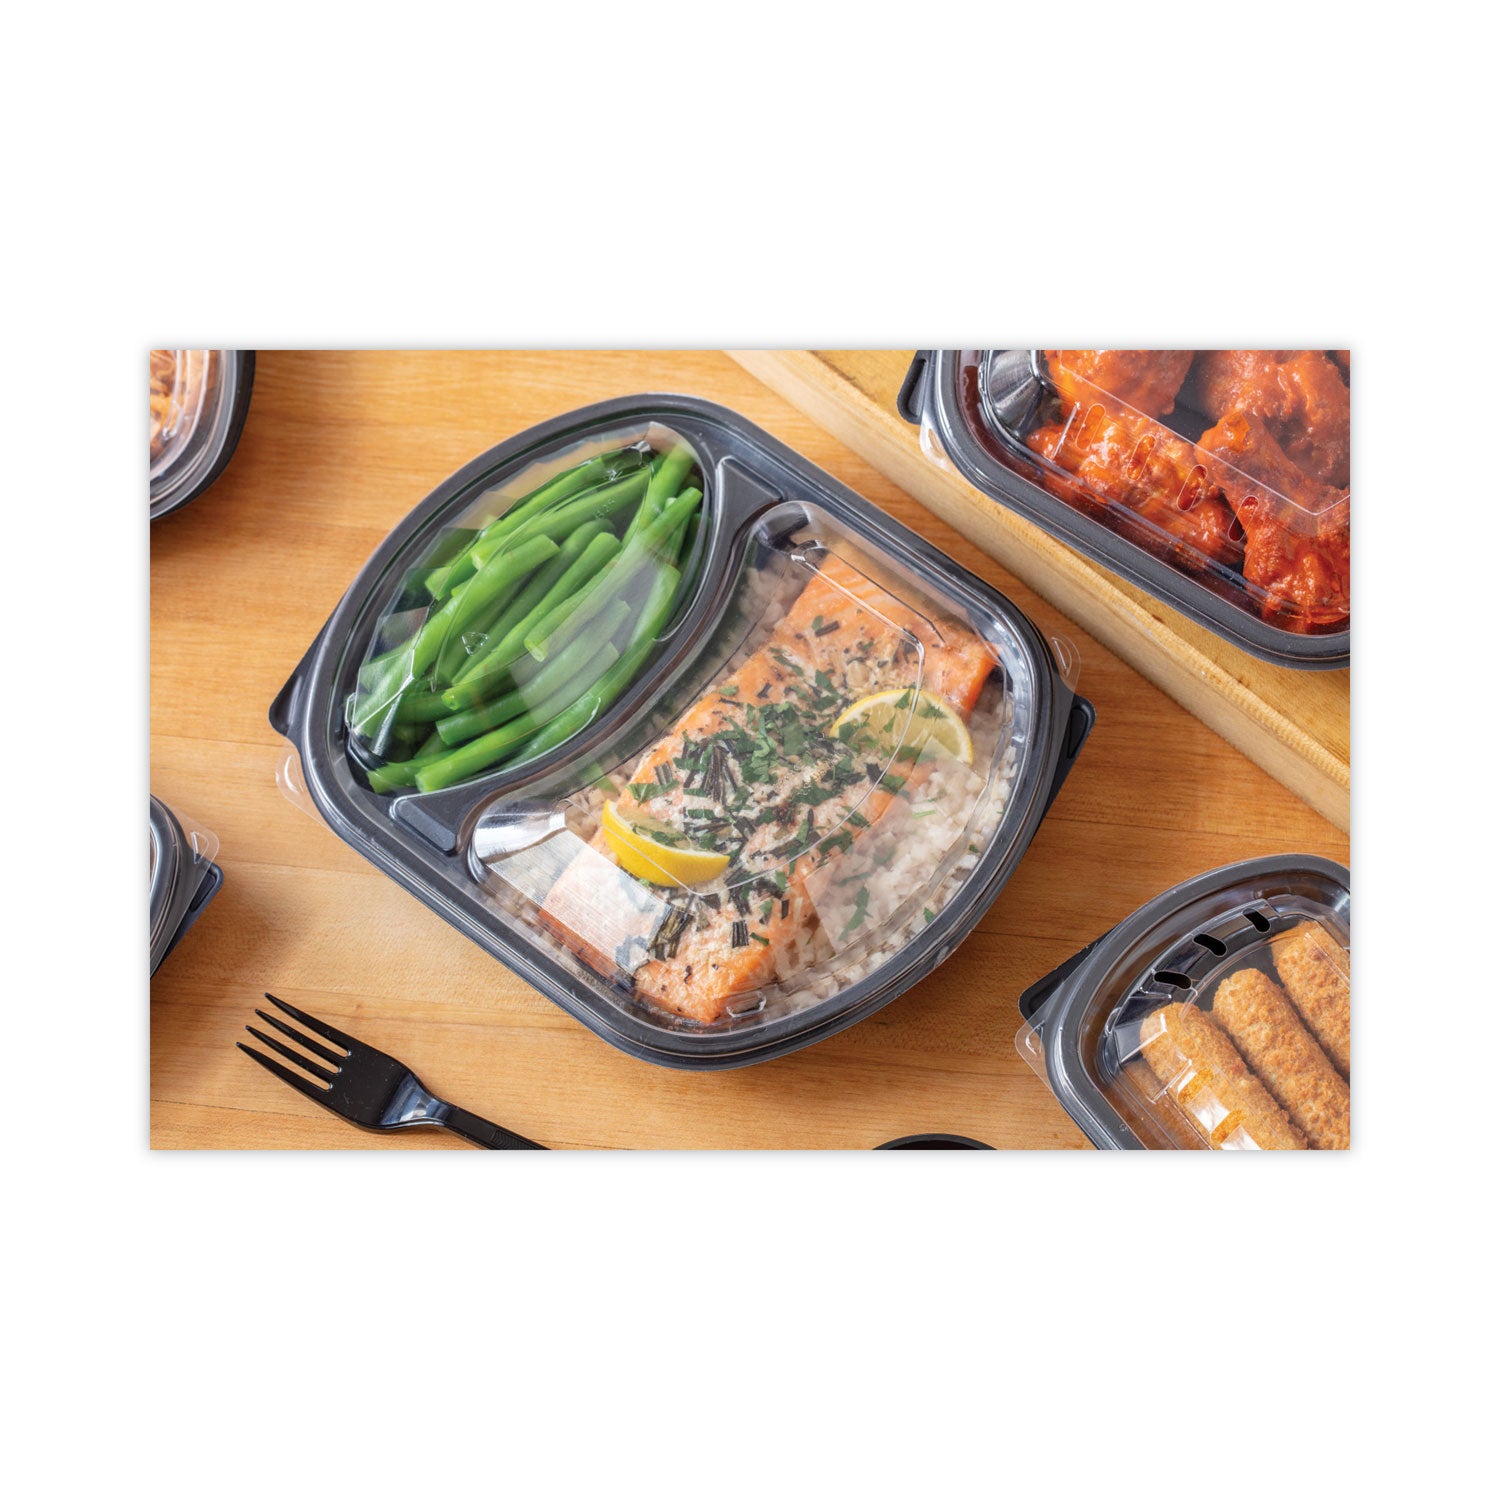 clearview-mealmaster-lid-with-fog-gard-coating-large-2-compartment-dome-lid-938-x-8-x-125-clear-plastic-252-carton_pctycn8467h00d0 - 6